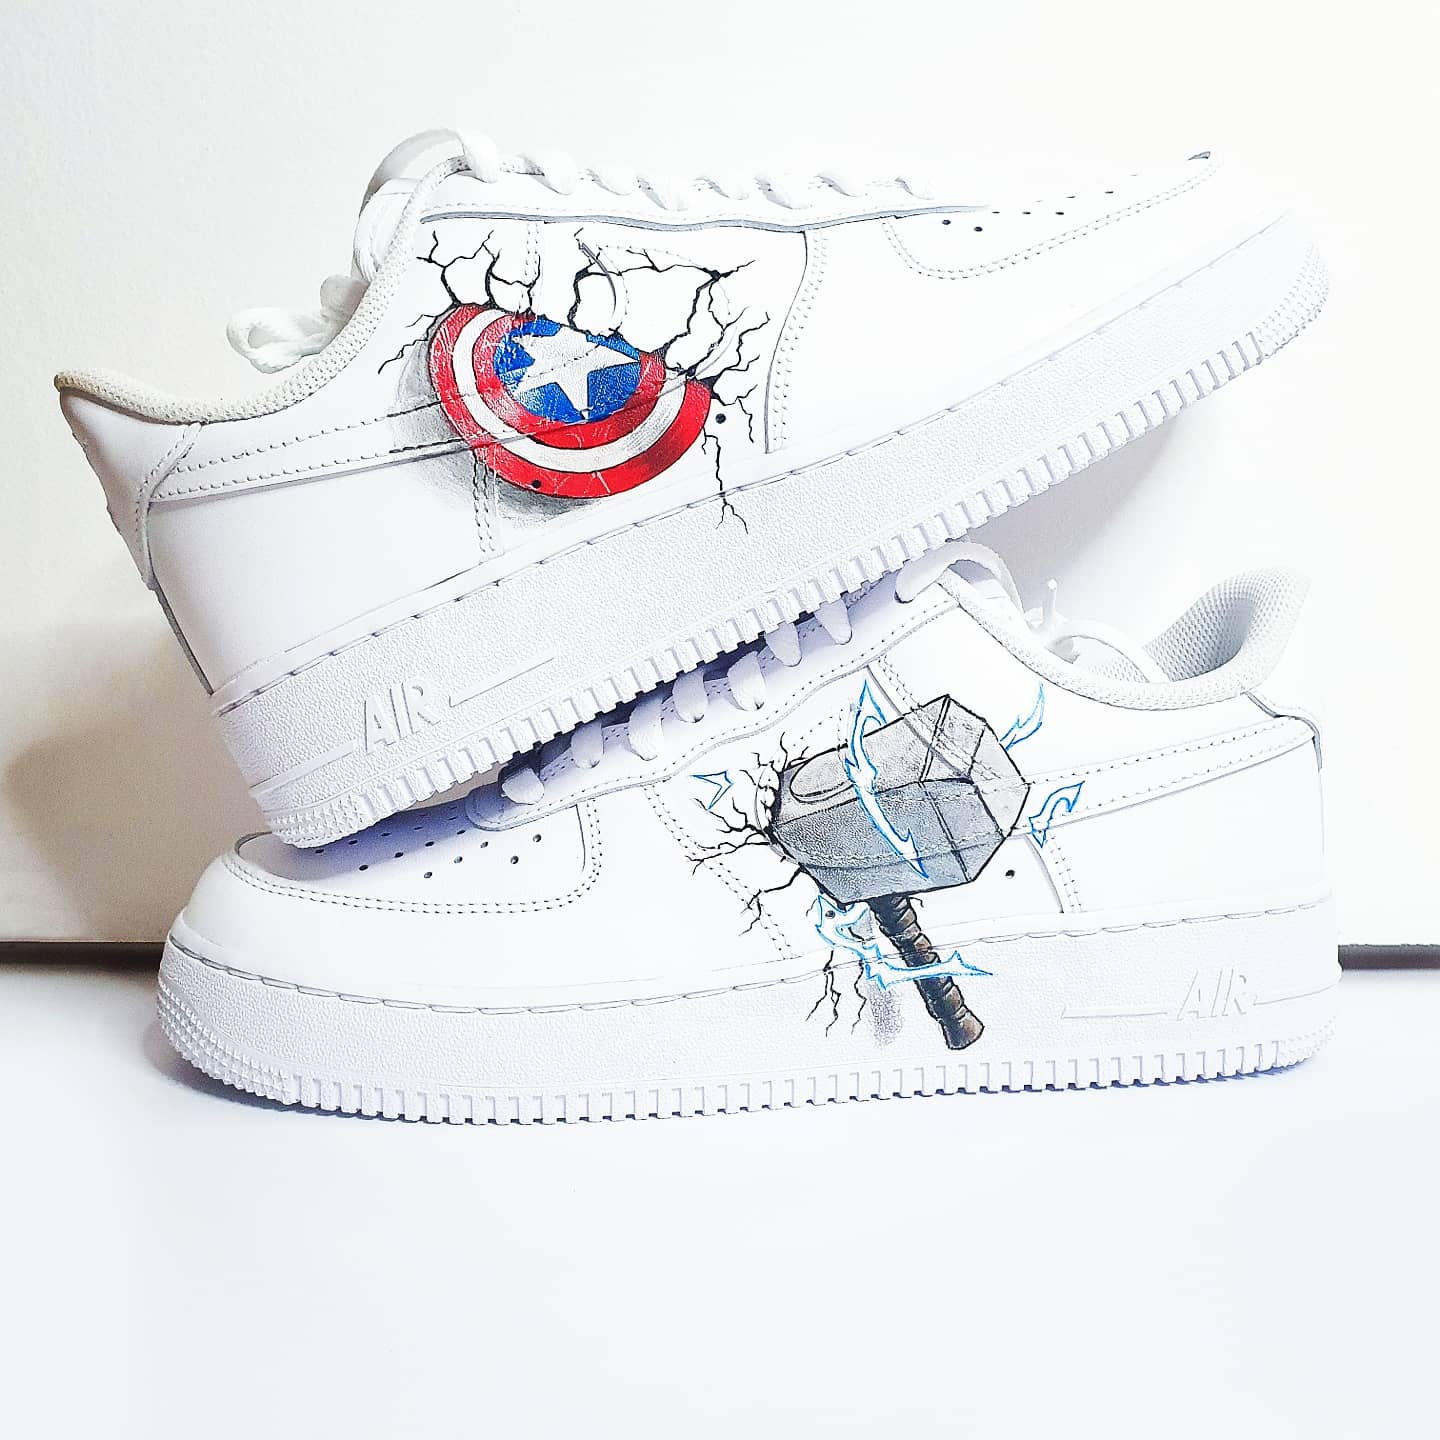 Your Sneakers on Twitter: "Air Force One - Avengers #sneakers #sneakerscustom #customsneakers #yoursneakers #shoescustom #nike #nikeairforceone #airforceone #airforceonecustom #custom #angeluspaint #sneakersaddict #avengers #thor ...